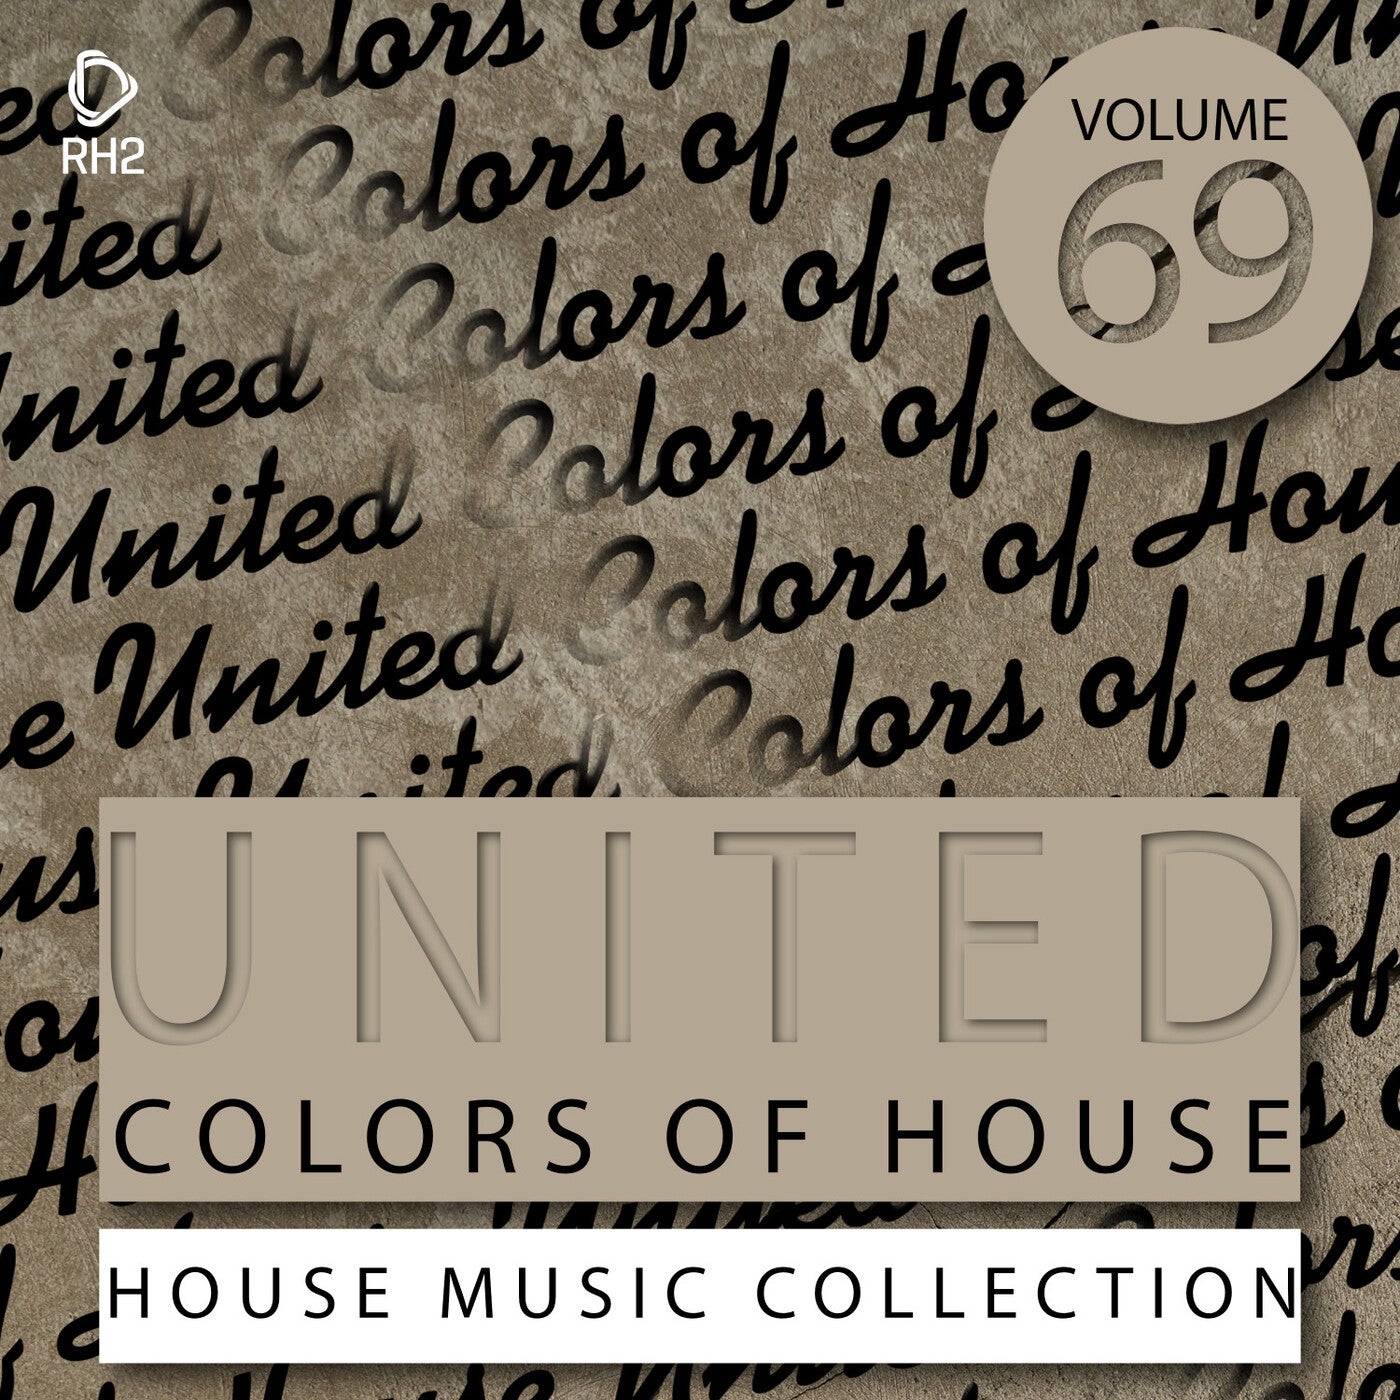 United Colors Of House Vol. 69